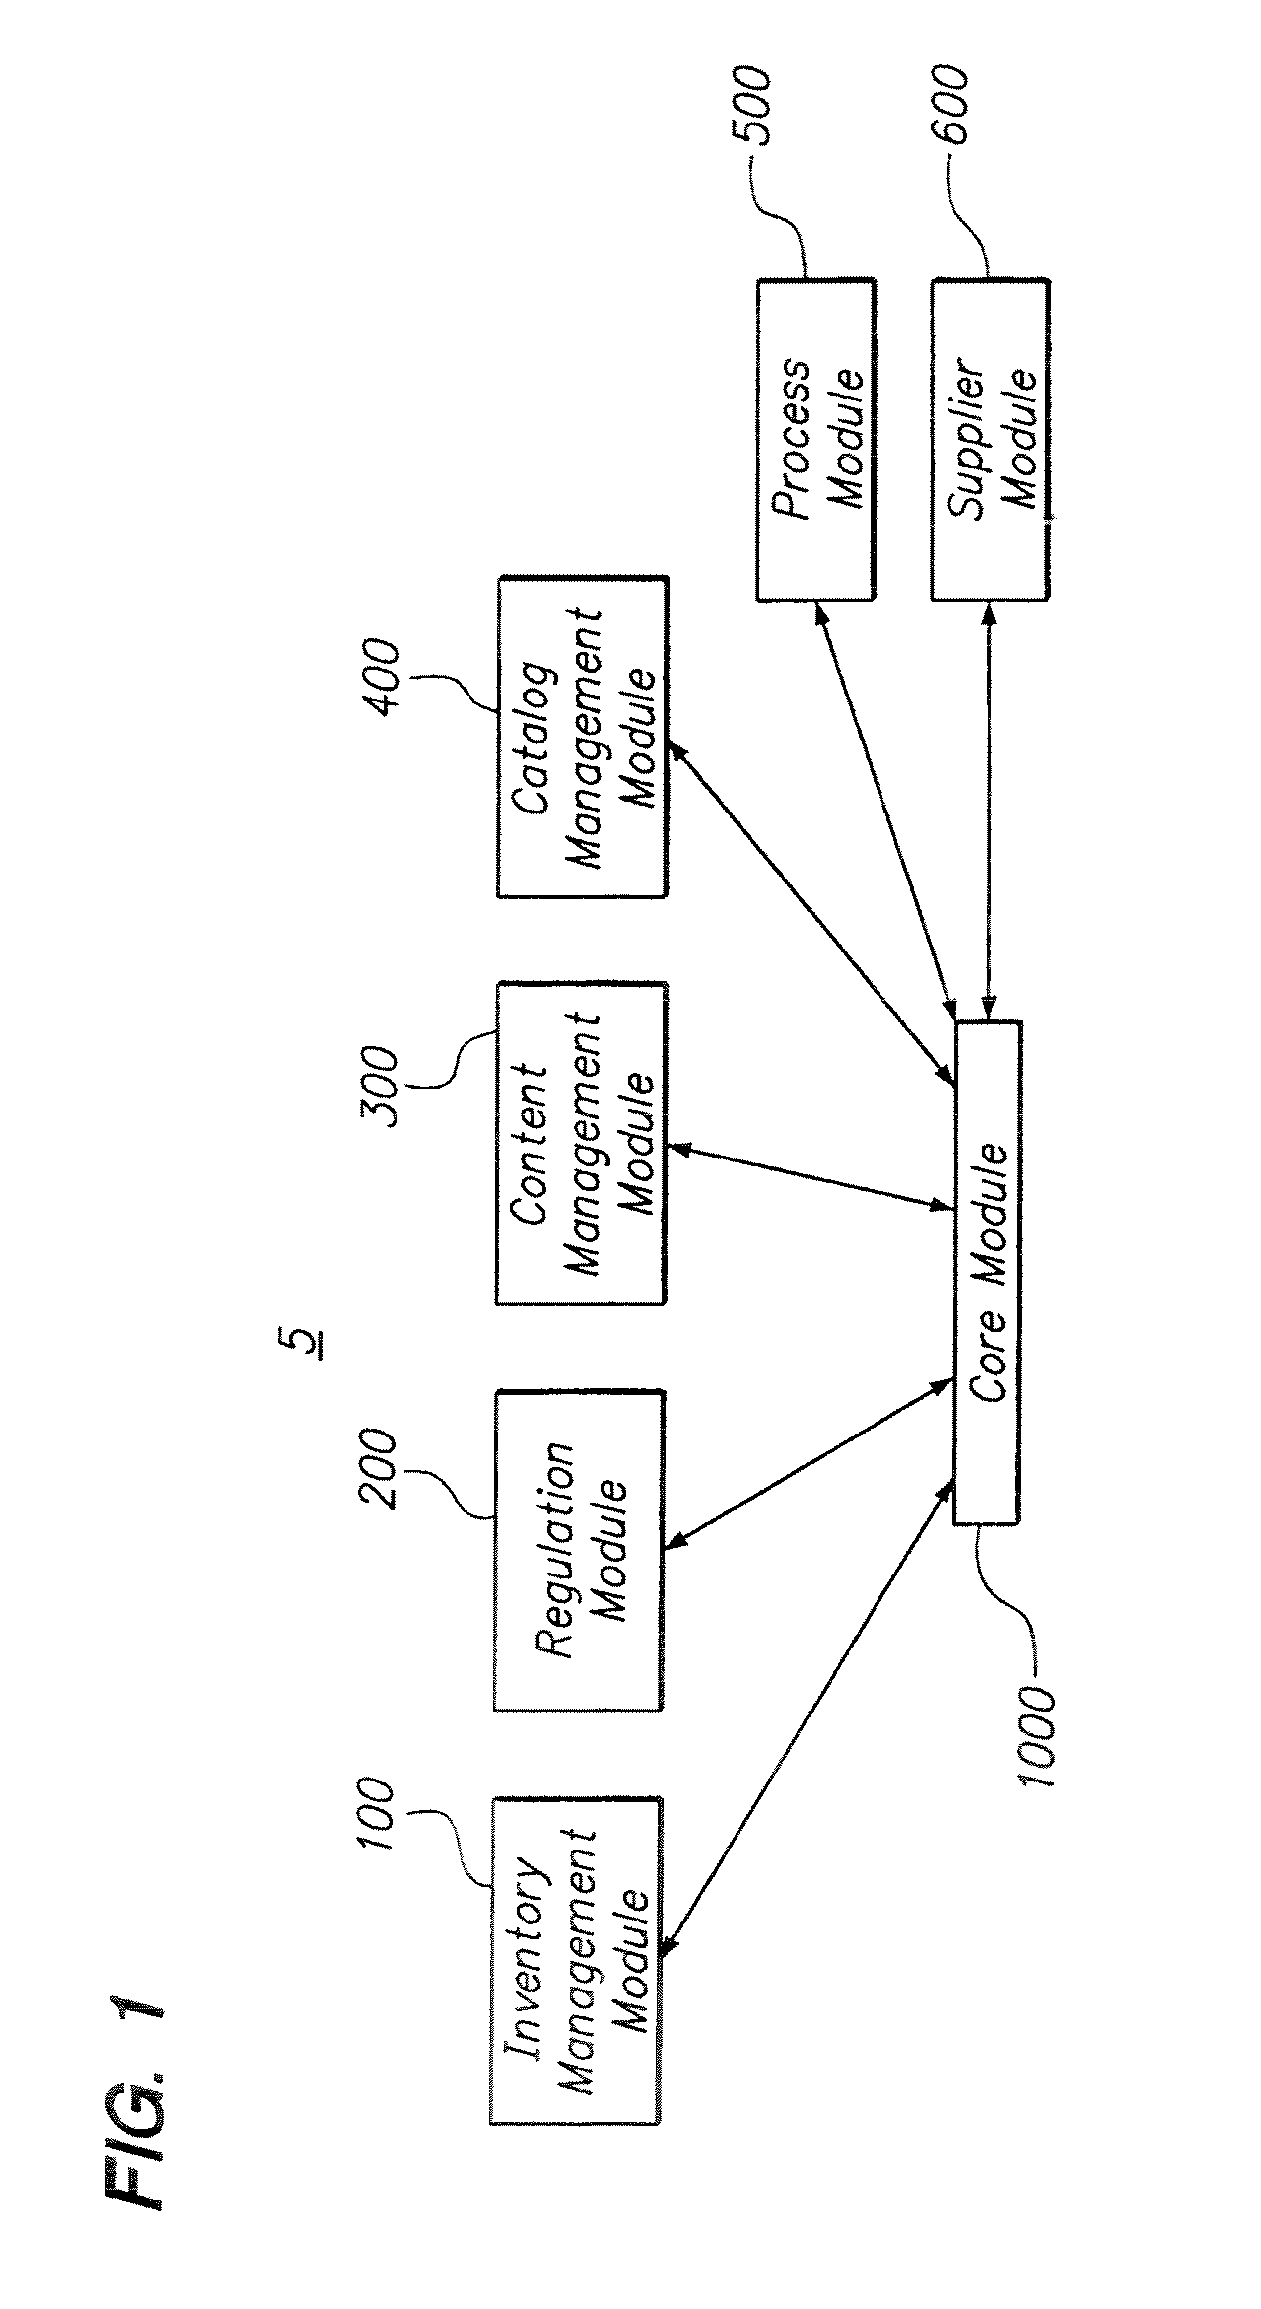 Systems and Methods for Managing the Development and Manufacturing of a Beverage